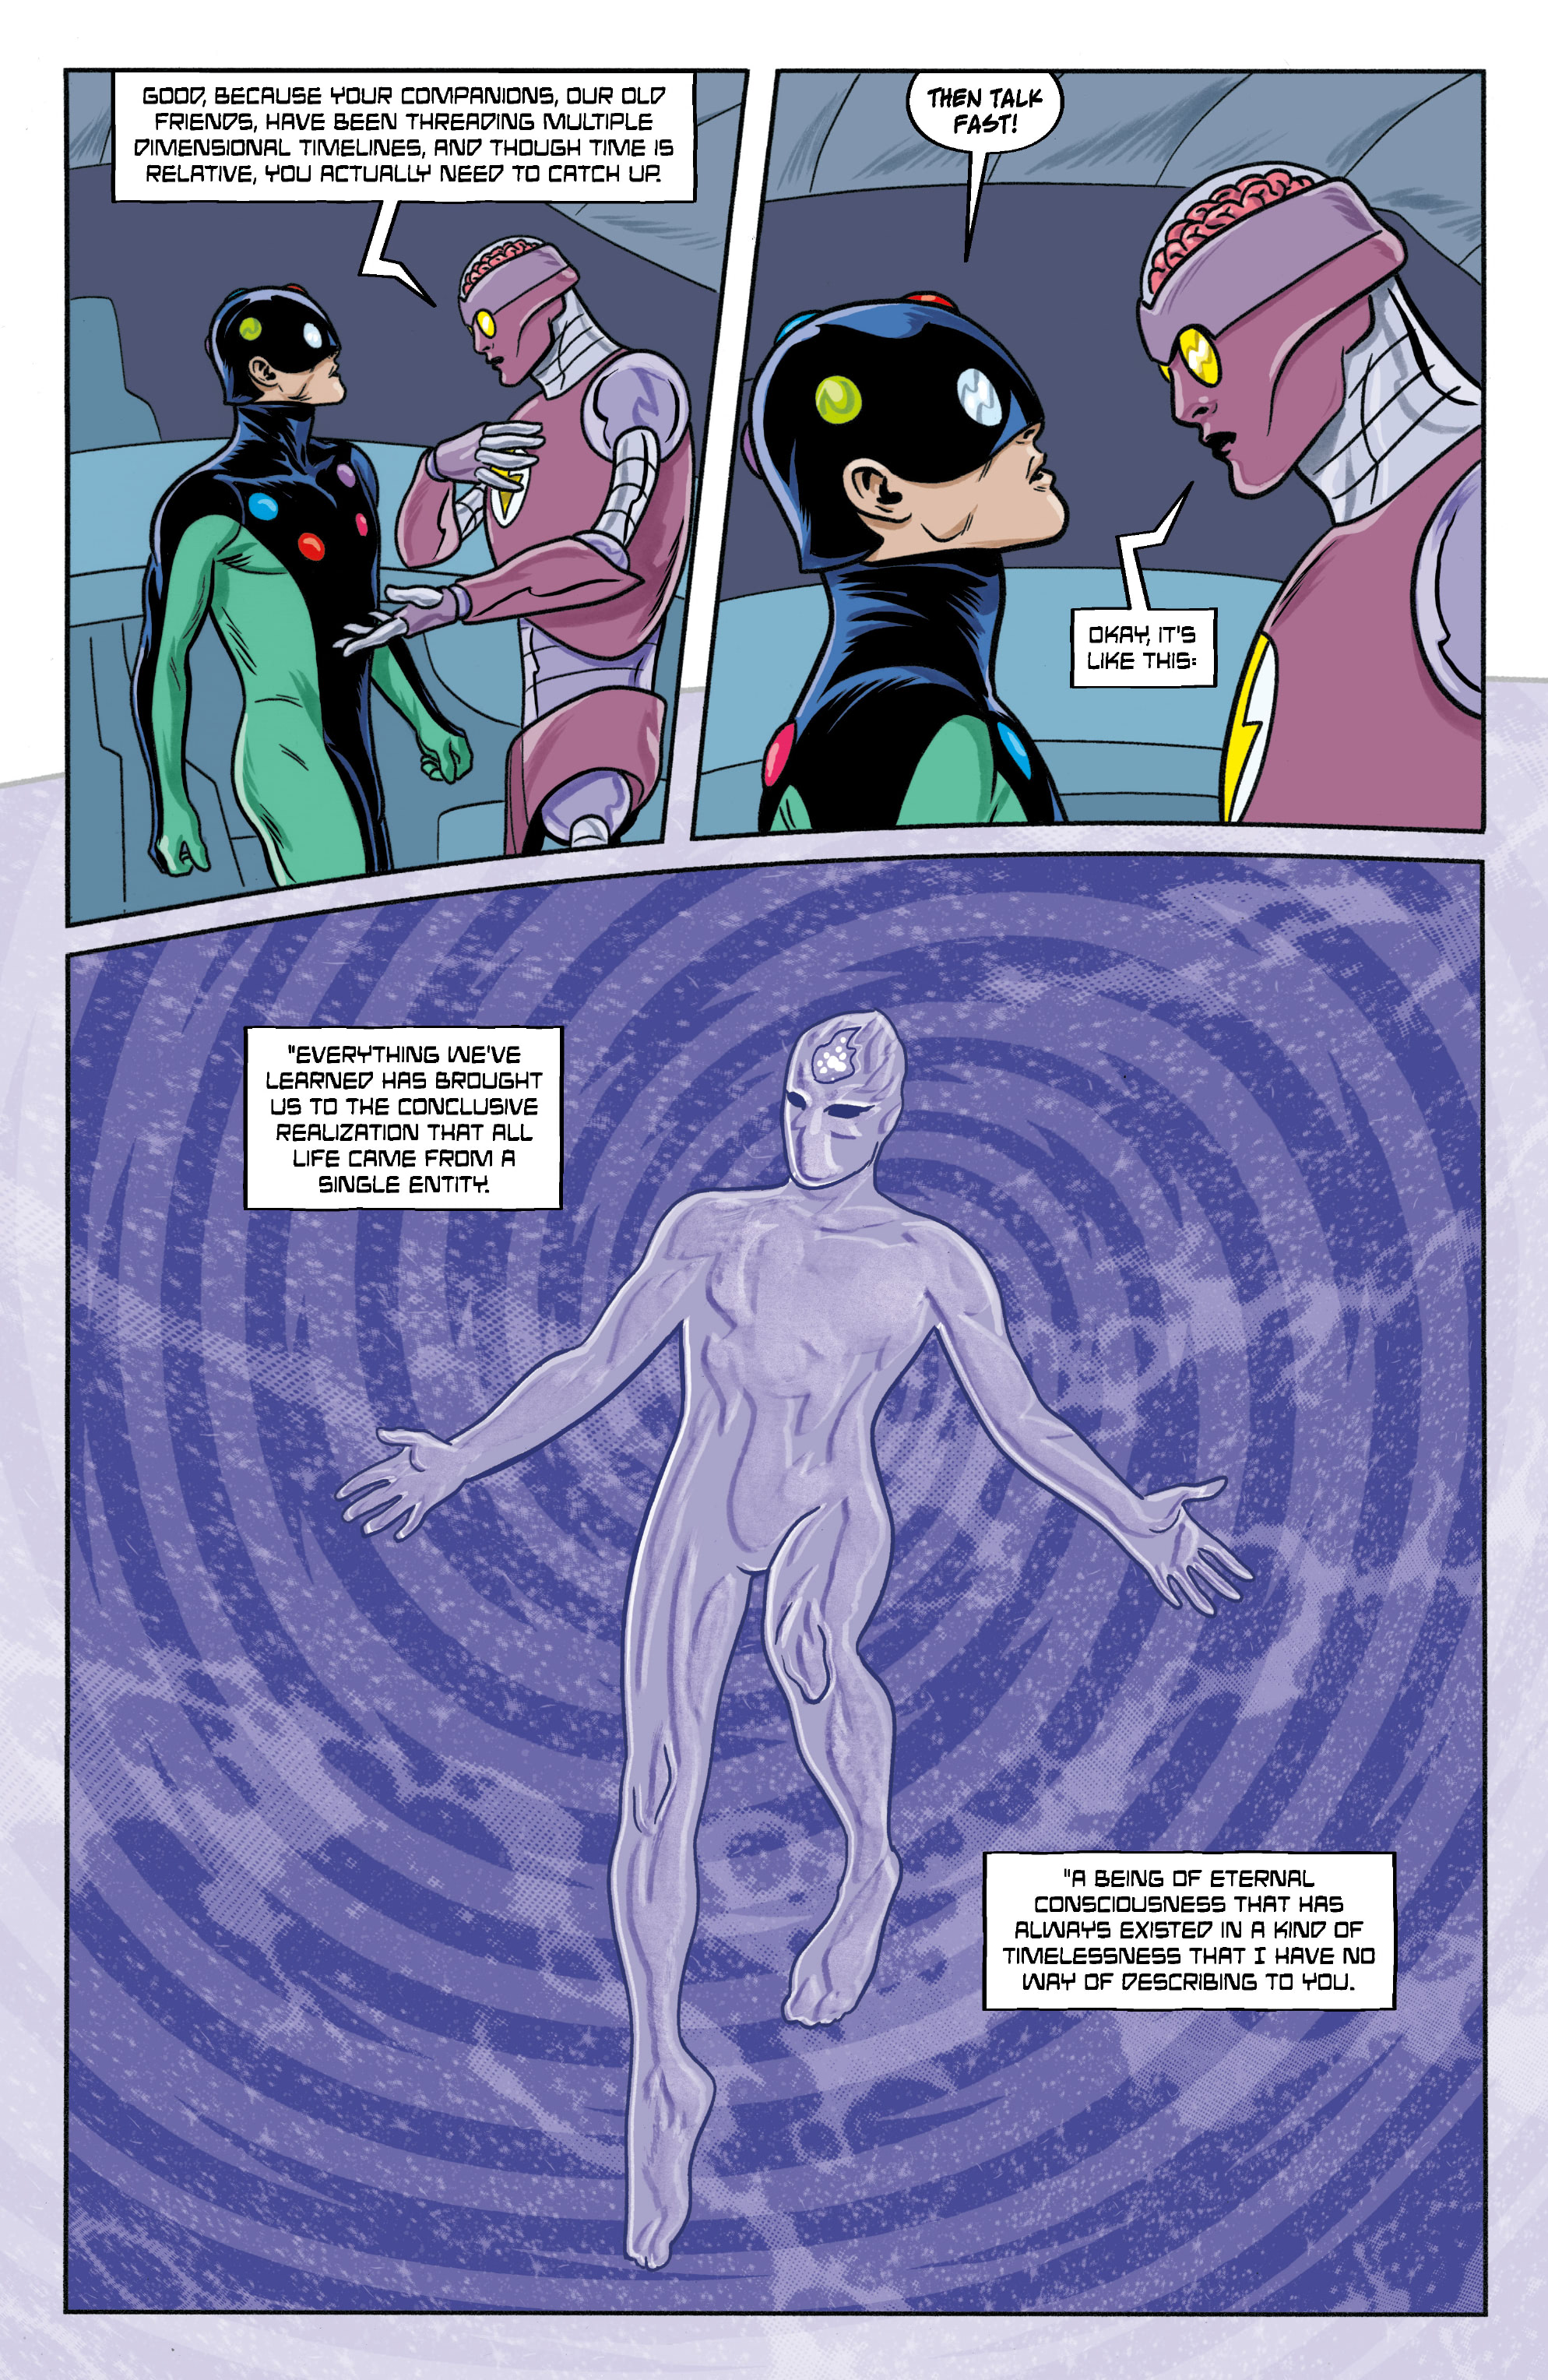 X-RAY ROBOT (2020-): Chapter 4 - Page 4